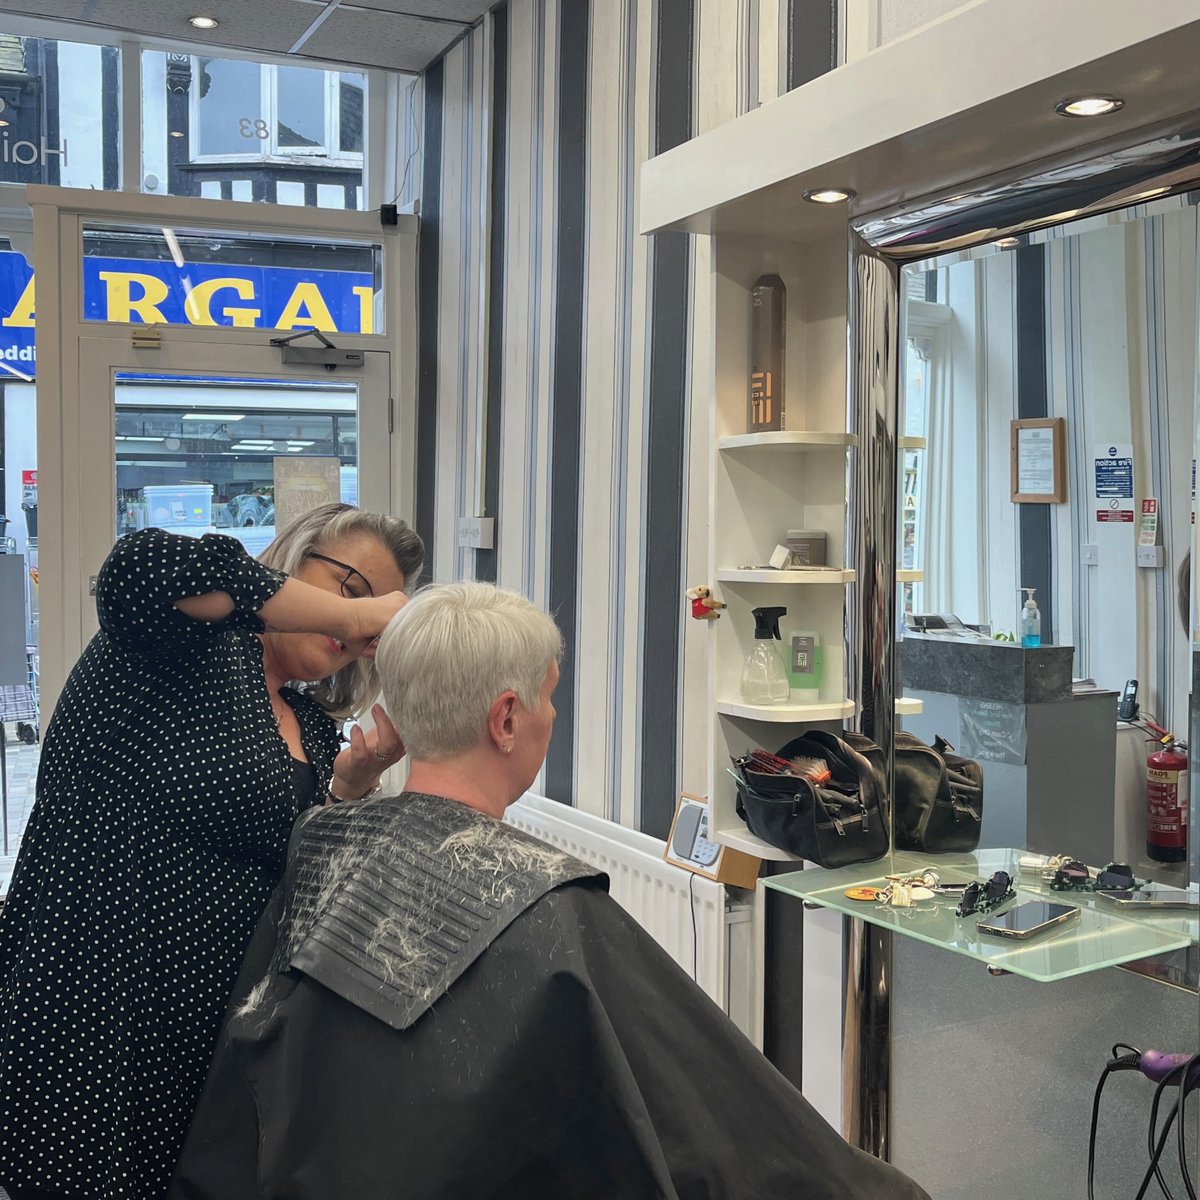 💇‍♀️ Feeling a change in your hairdo? Need a fresh cut and blowdry to re-energize your look? Look no further than Helen Hair! Book your appointment today at 01606 44123 or pop into the salon along Witton Street next to Charlie's Cafe. #Northwich